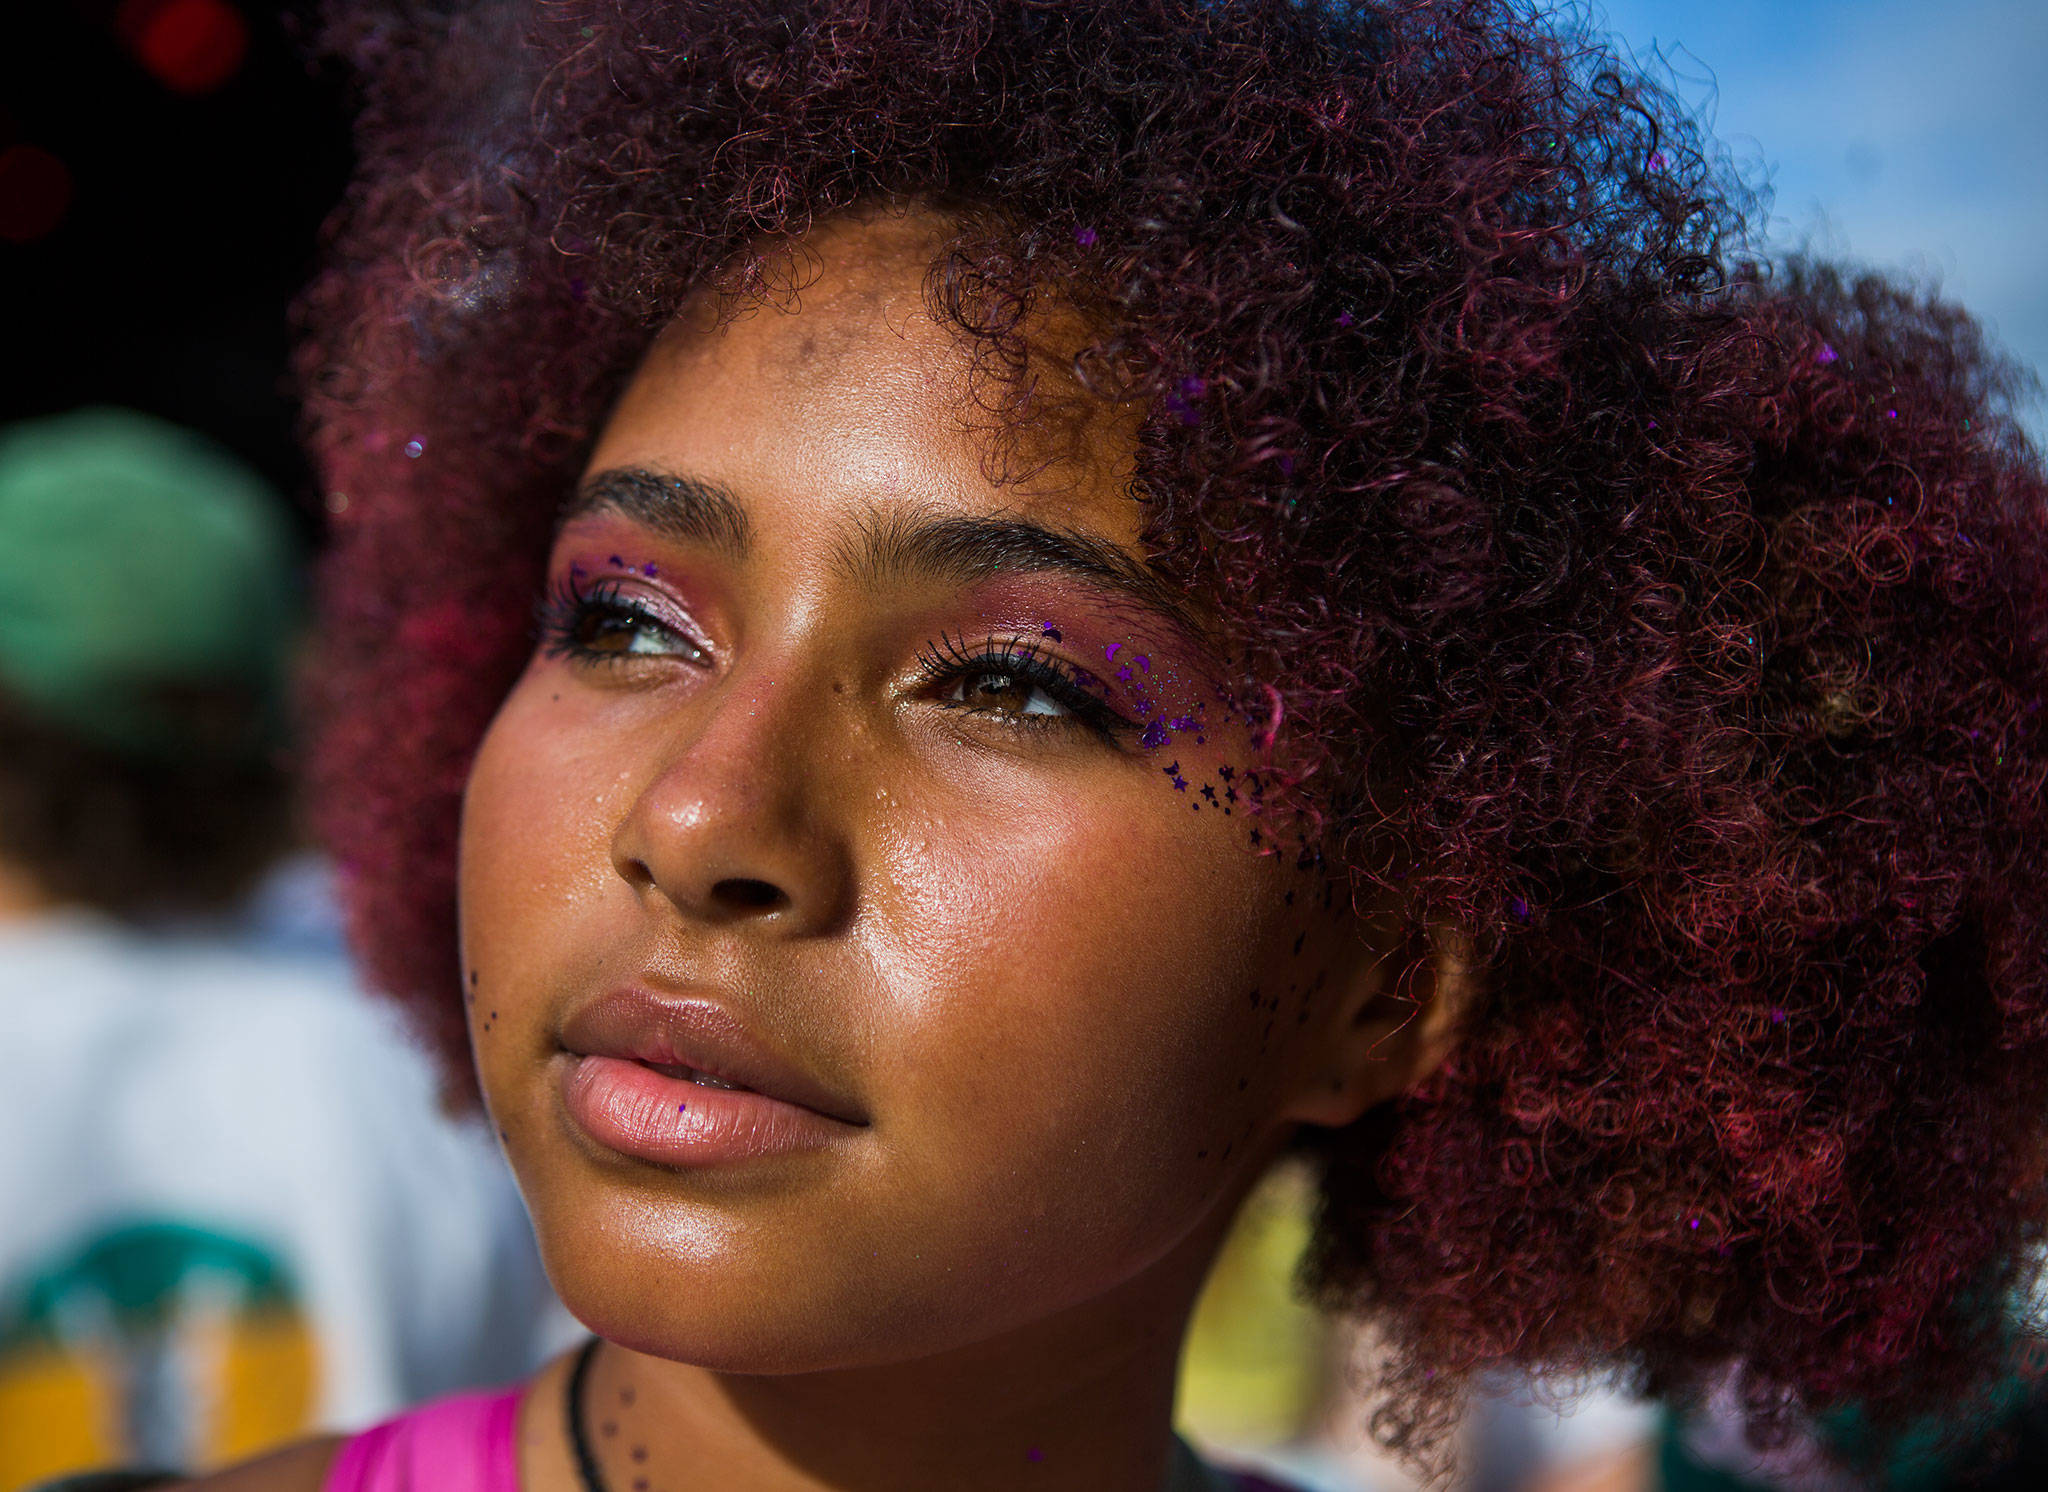 Mychal May, 16, poses for a portrait during Bumbershoot Music & Arts Festival on Friday, Aug. 30, 2019 in Seattle, Wash. (Olivia Vanni / The Herald)